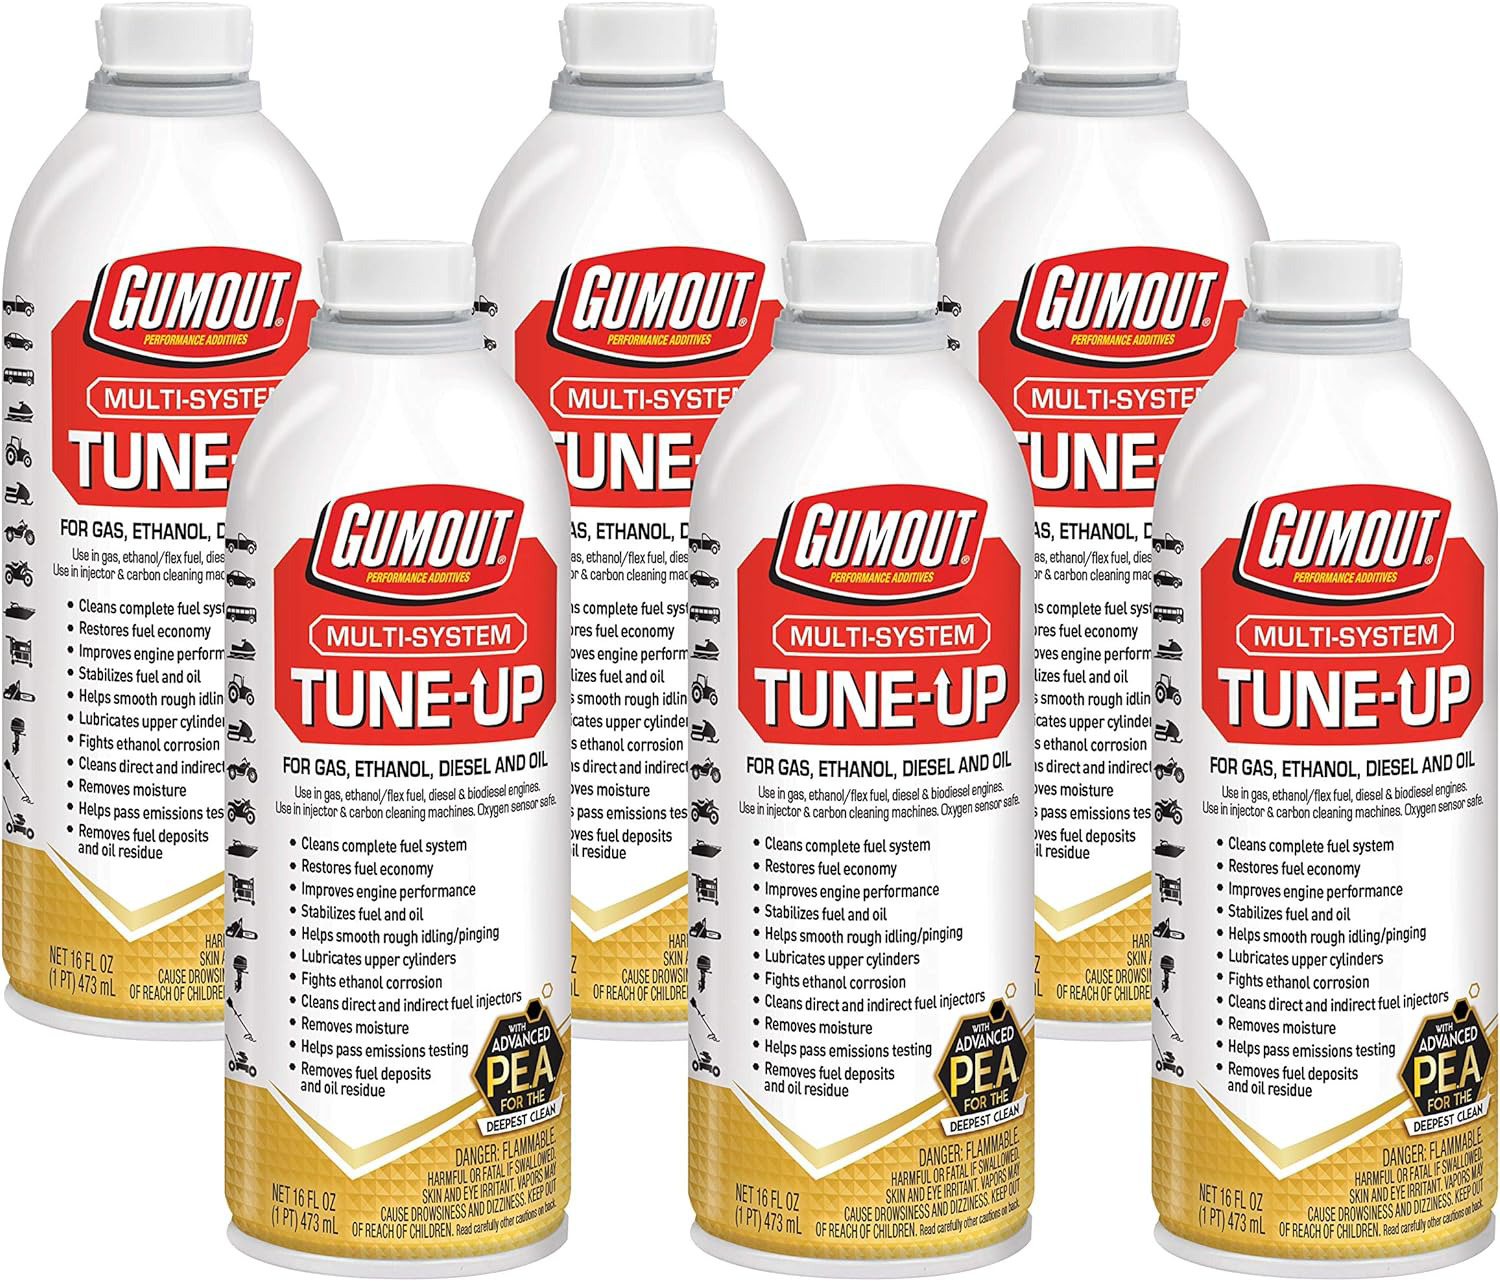 Gumout 510011 Multi-System Tune-Up, 16 fl oz. (Pack of 6)